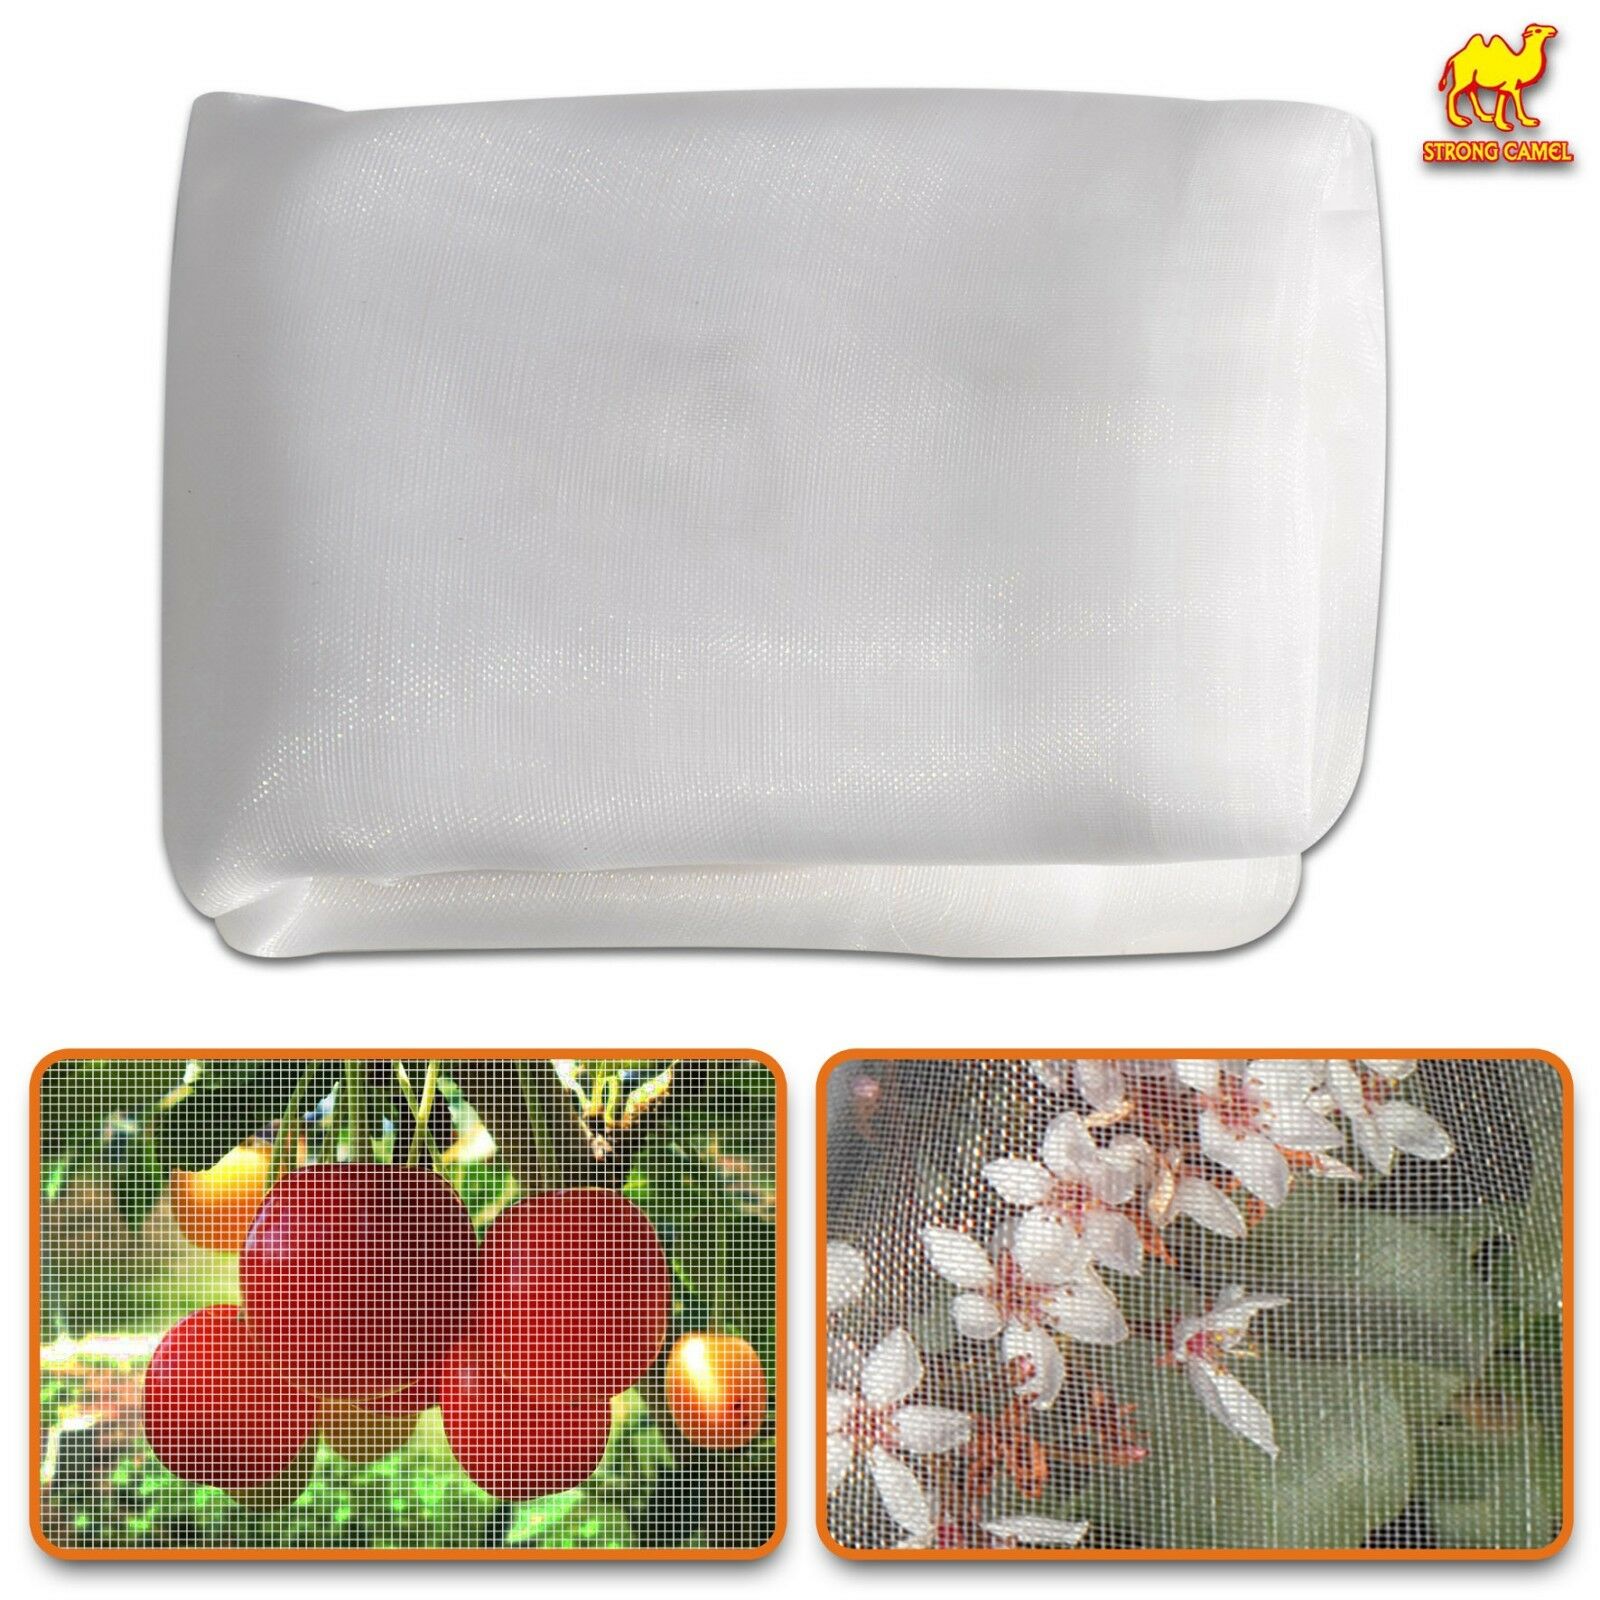 Multi-size Mosquito Netting Bug Insect Bird Net Garden Protective Mesh Barrier